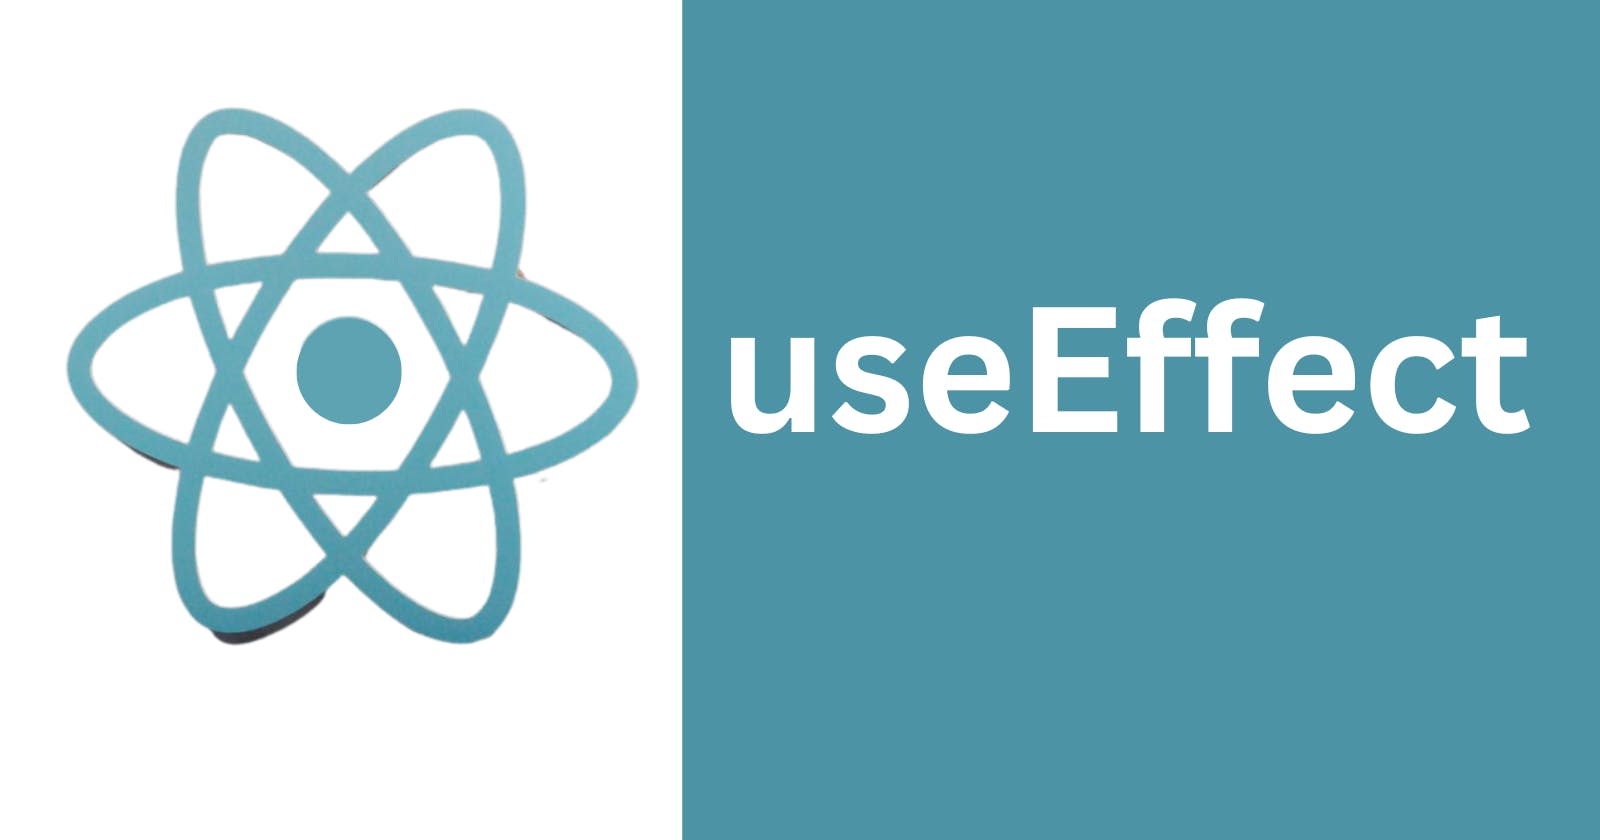 React useEffect Explained for Beginners